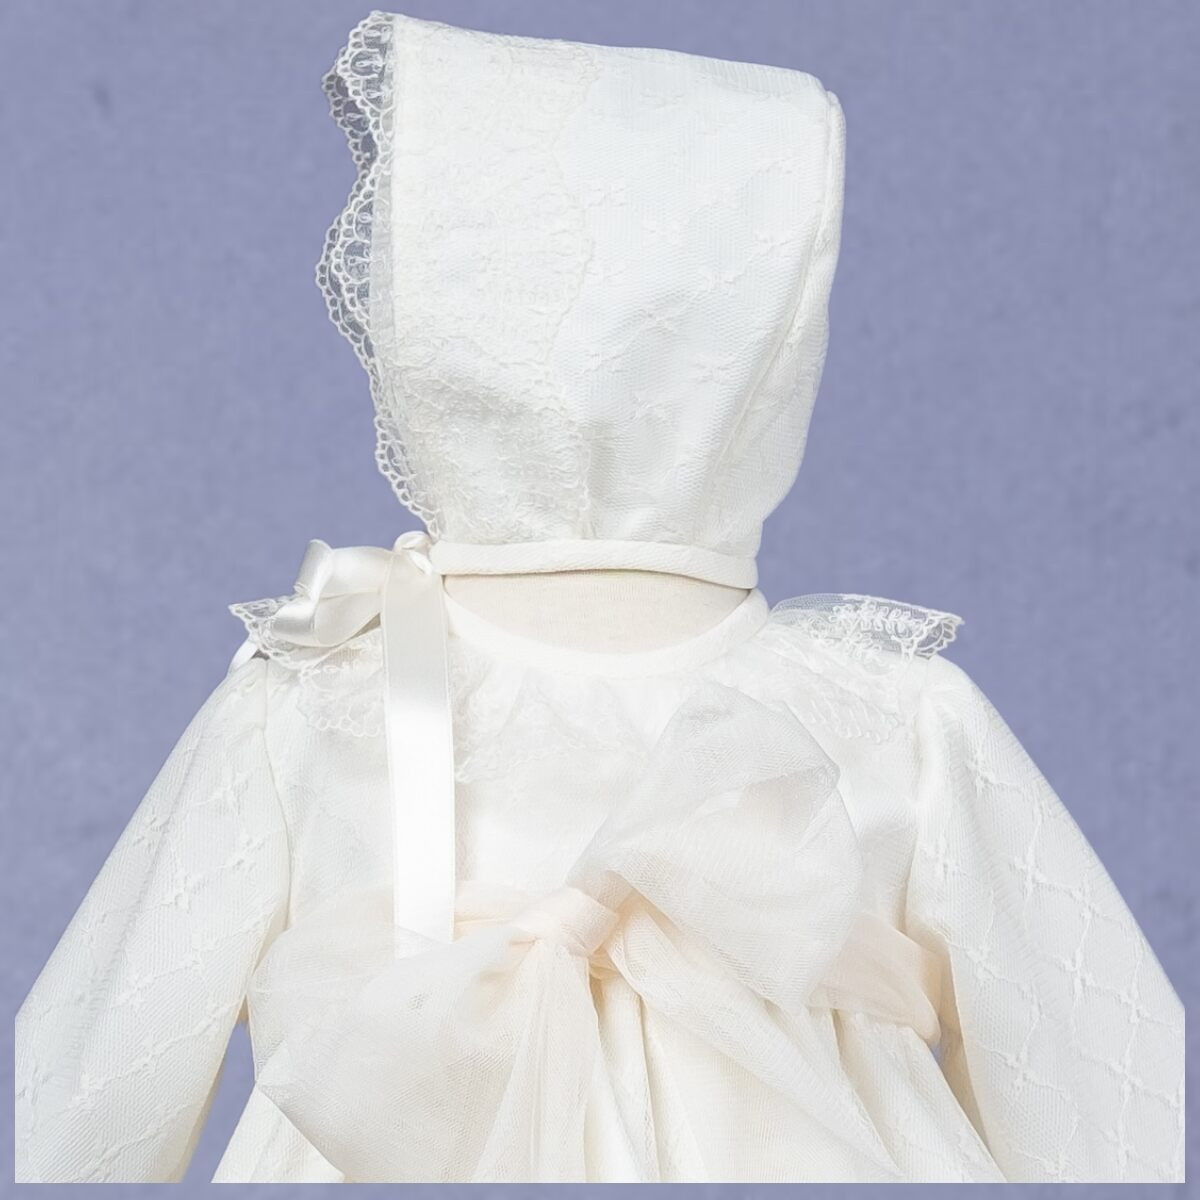 CHRISTENING DRESS WITH BLOOMER AND BONNET MISHA BABY - 2